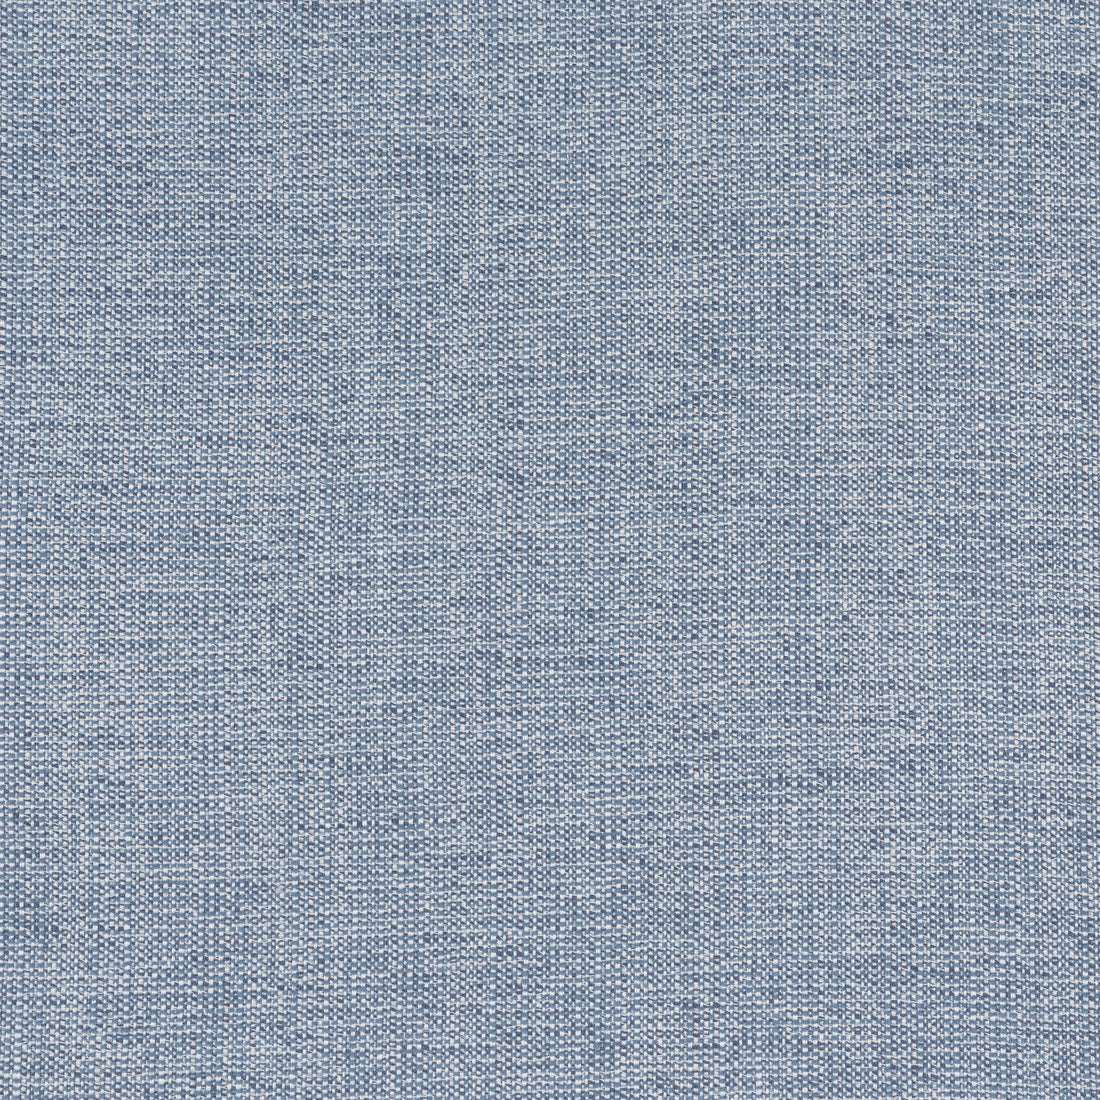 Sacchi fabric in denim color - pattern number W8760 - by Thibaut in the Haven Textures collection